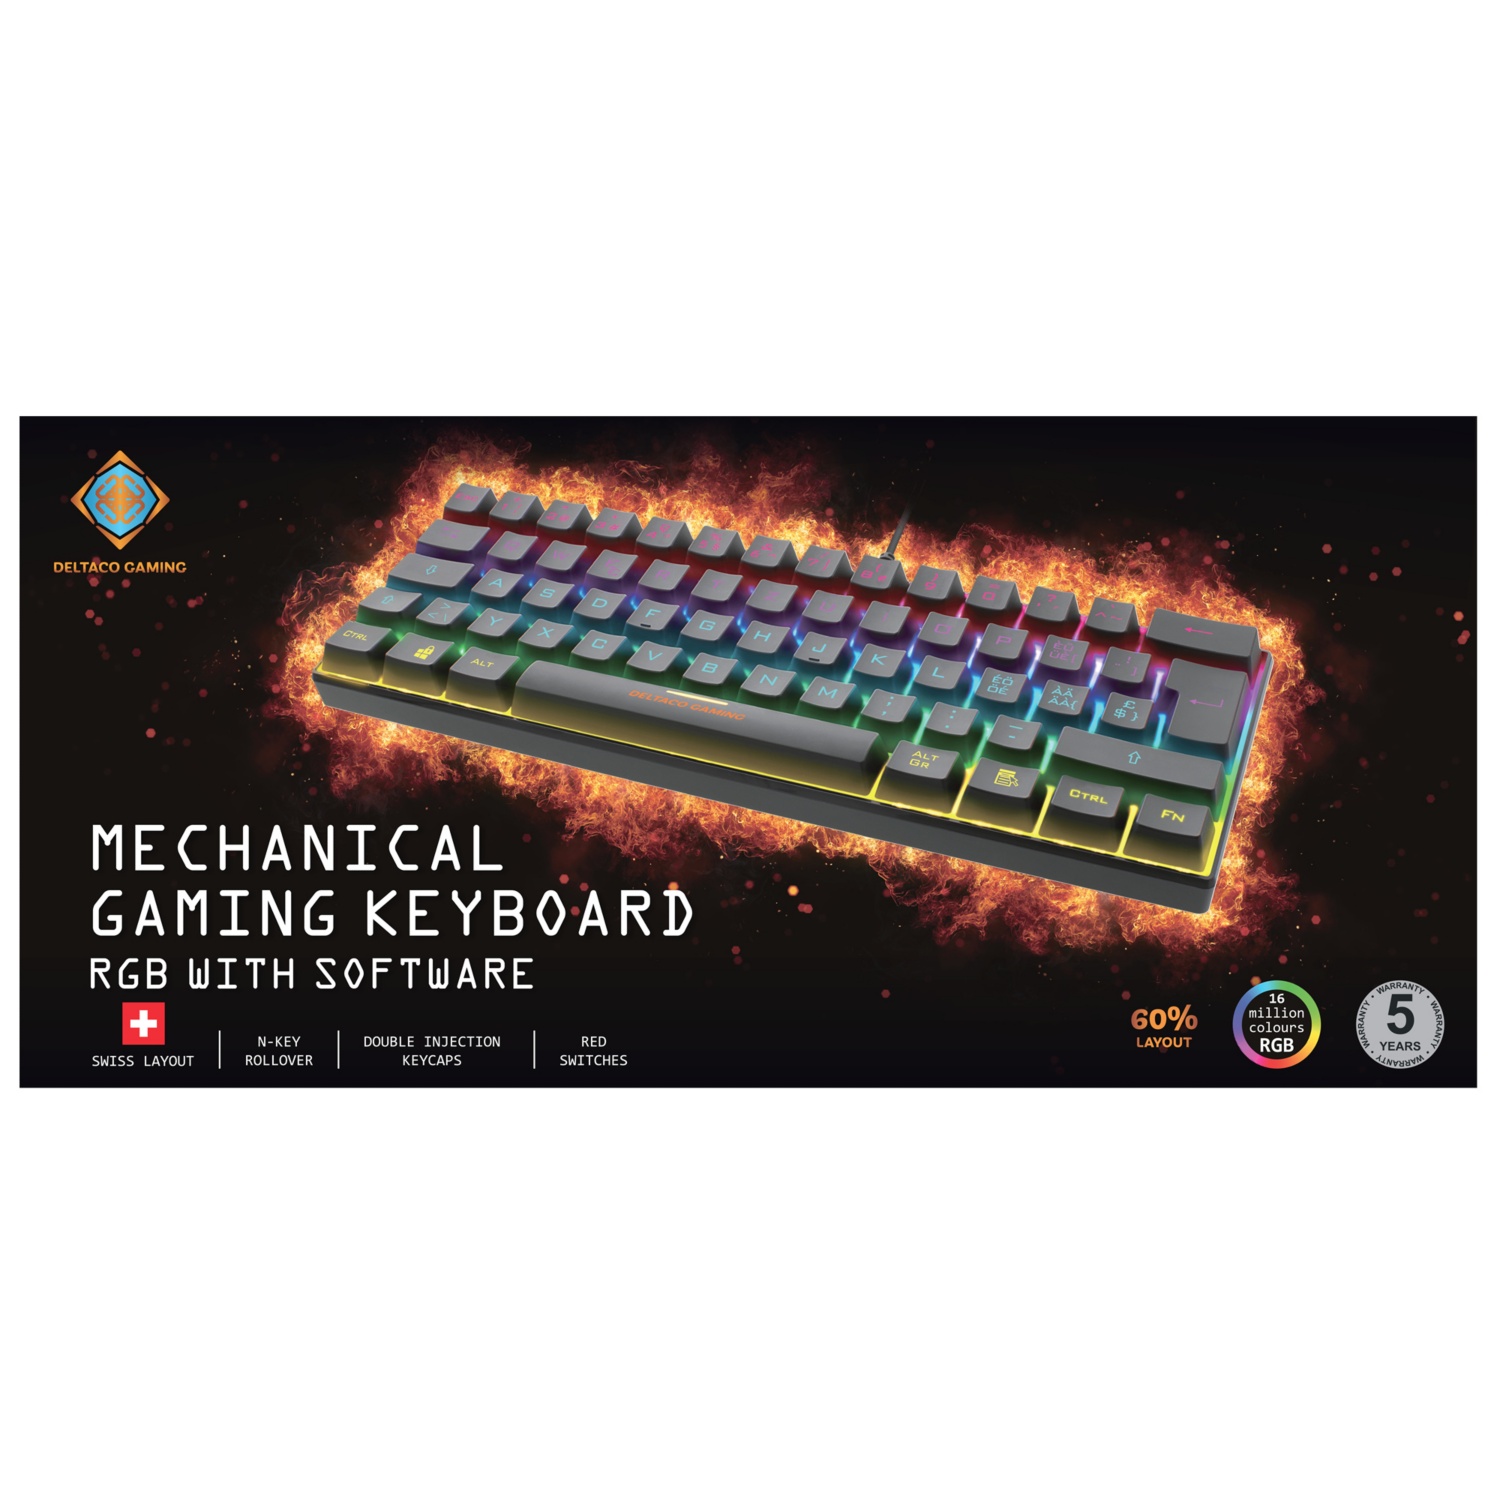 DELTACO A NORDIC BRAND Gaming Keyboard